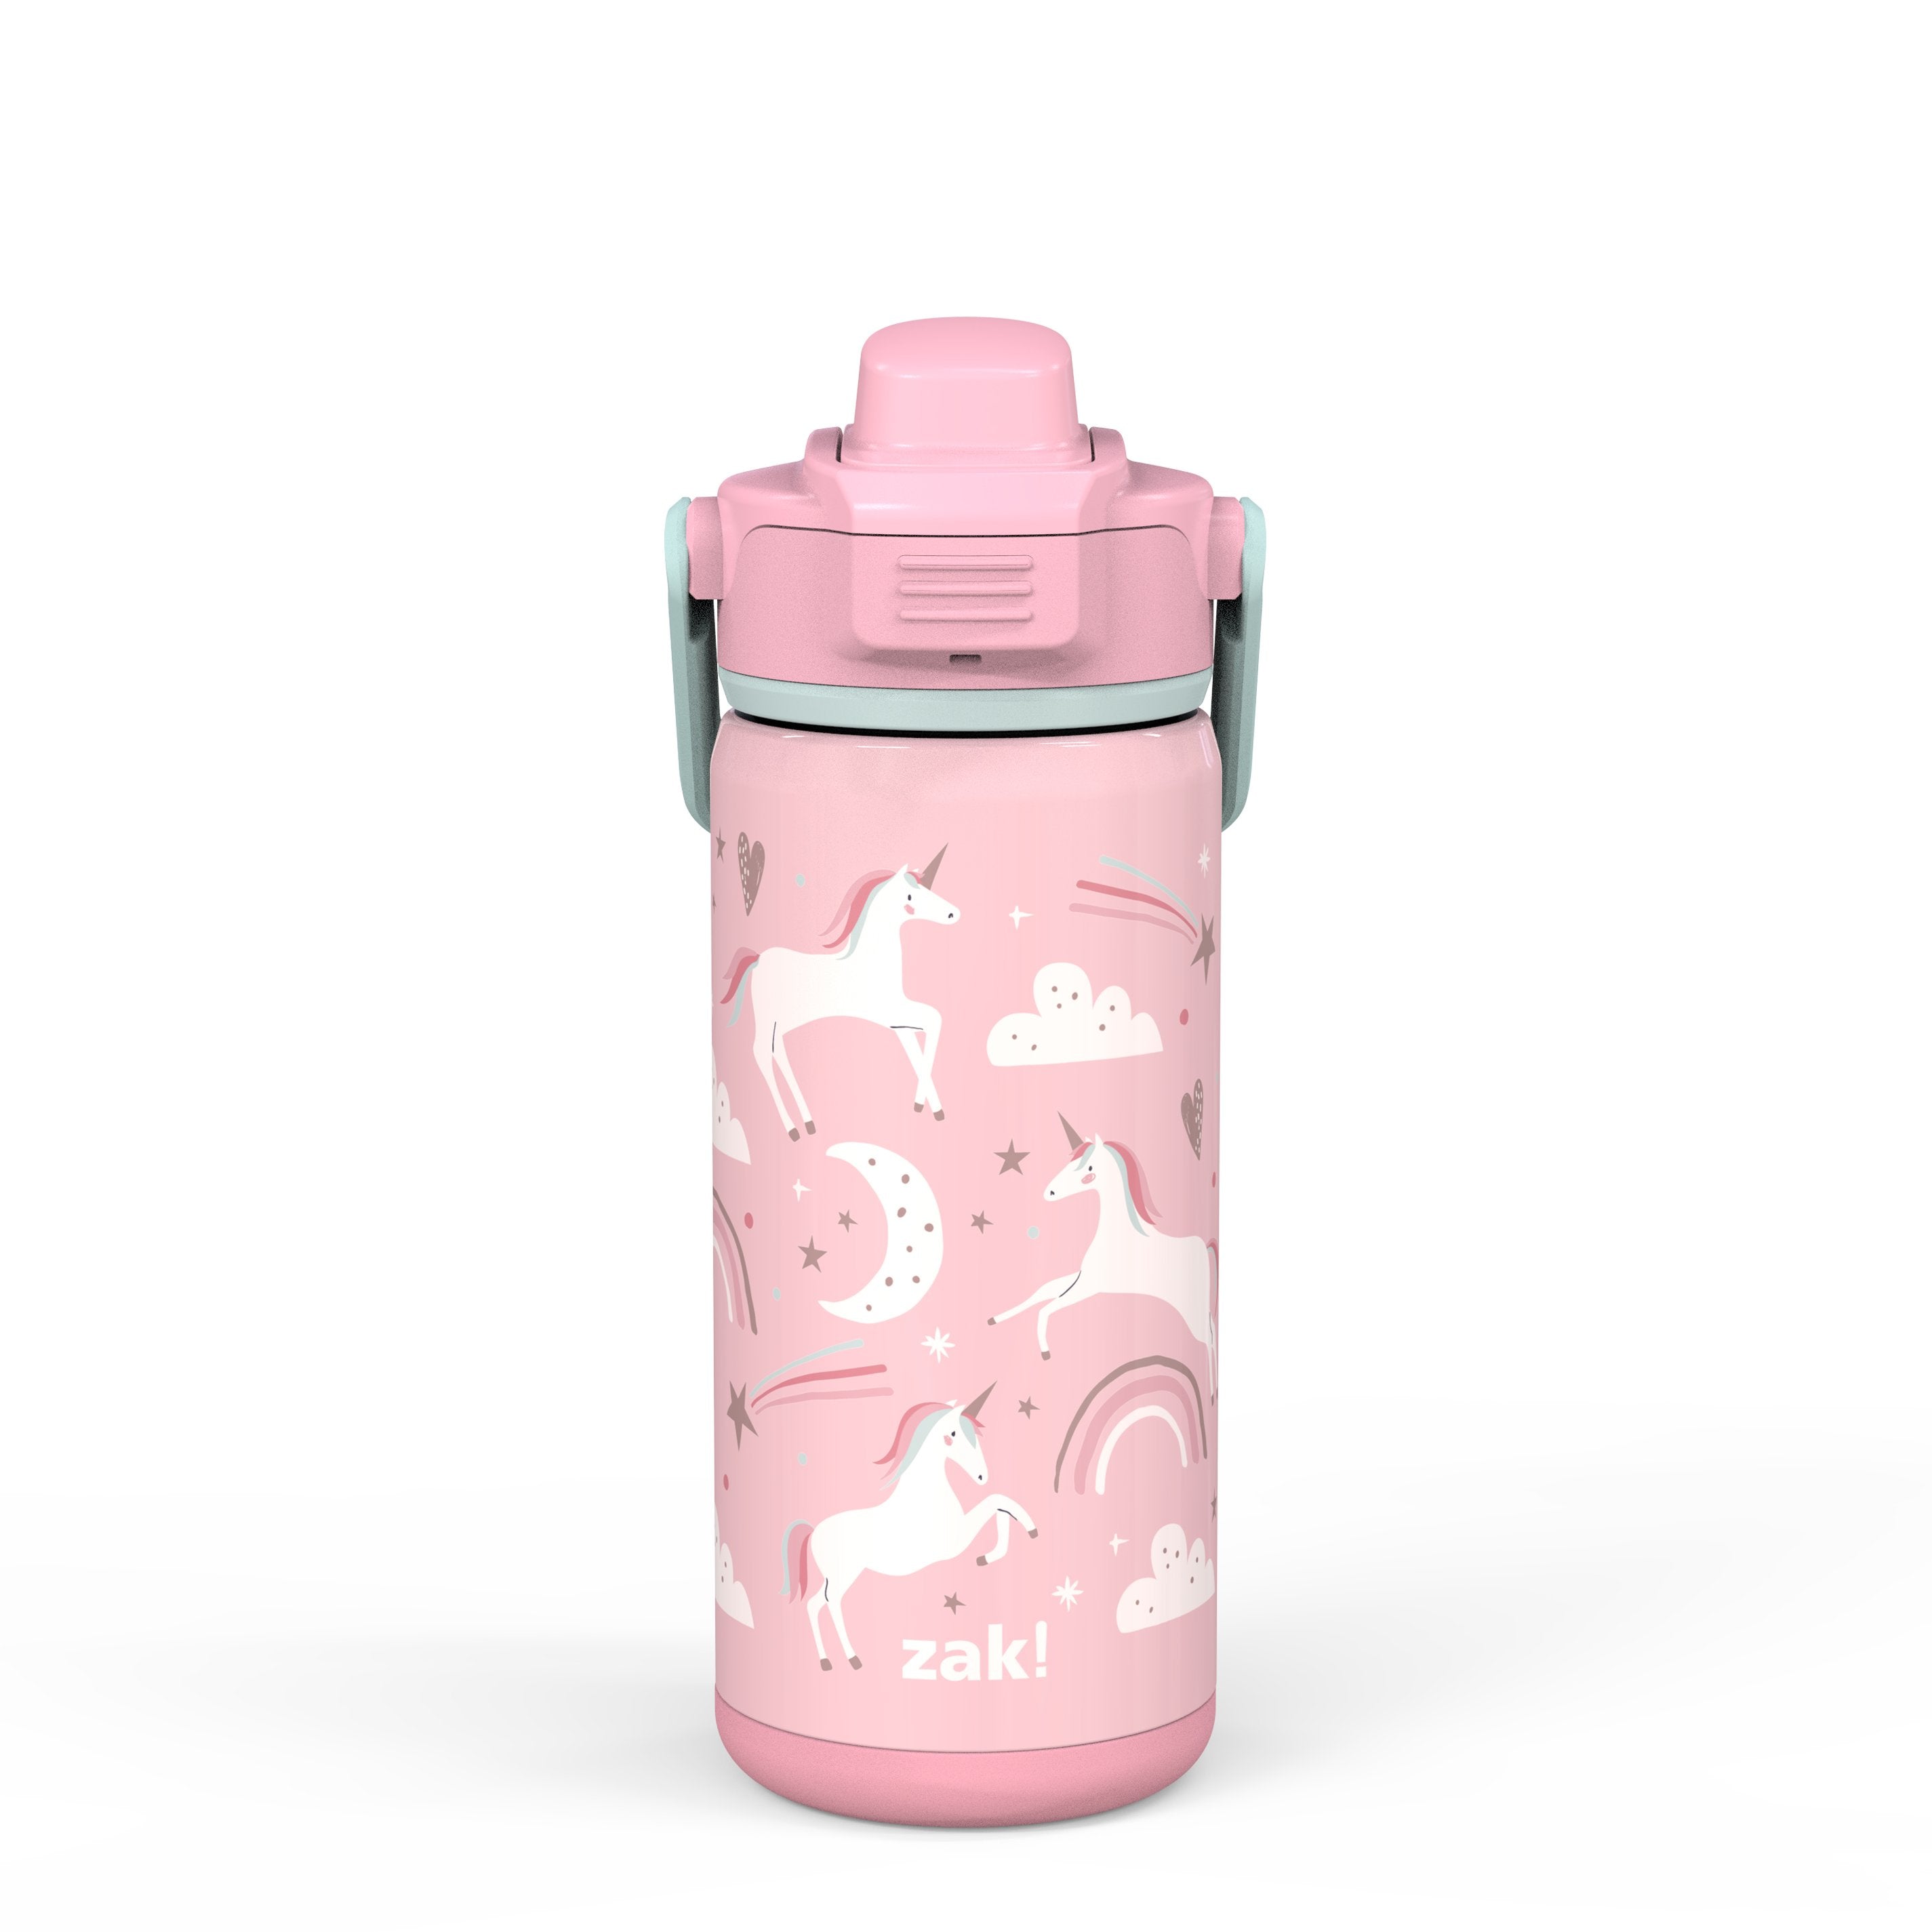 15 oz Cute Unicorn Kids Water Bottle Stainless Steel with Straw Lid